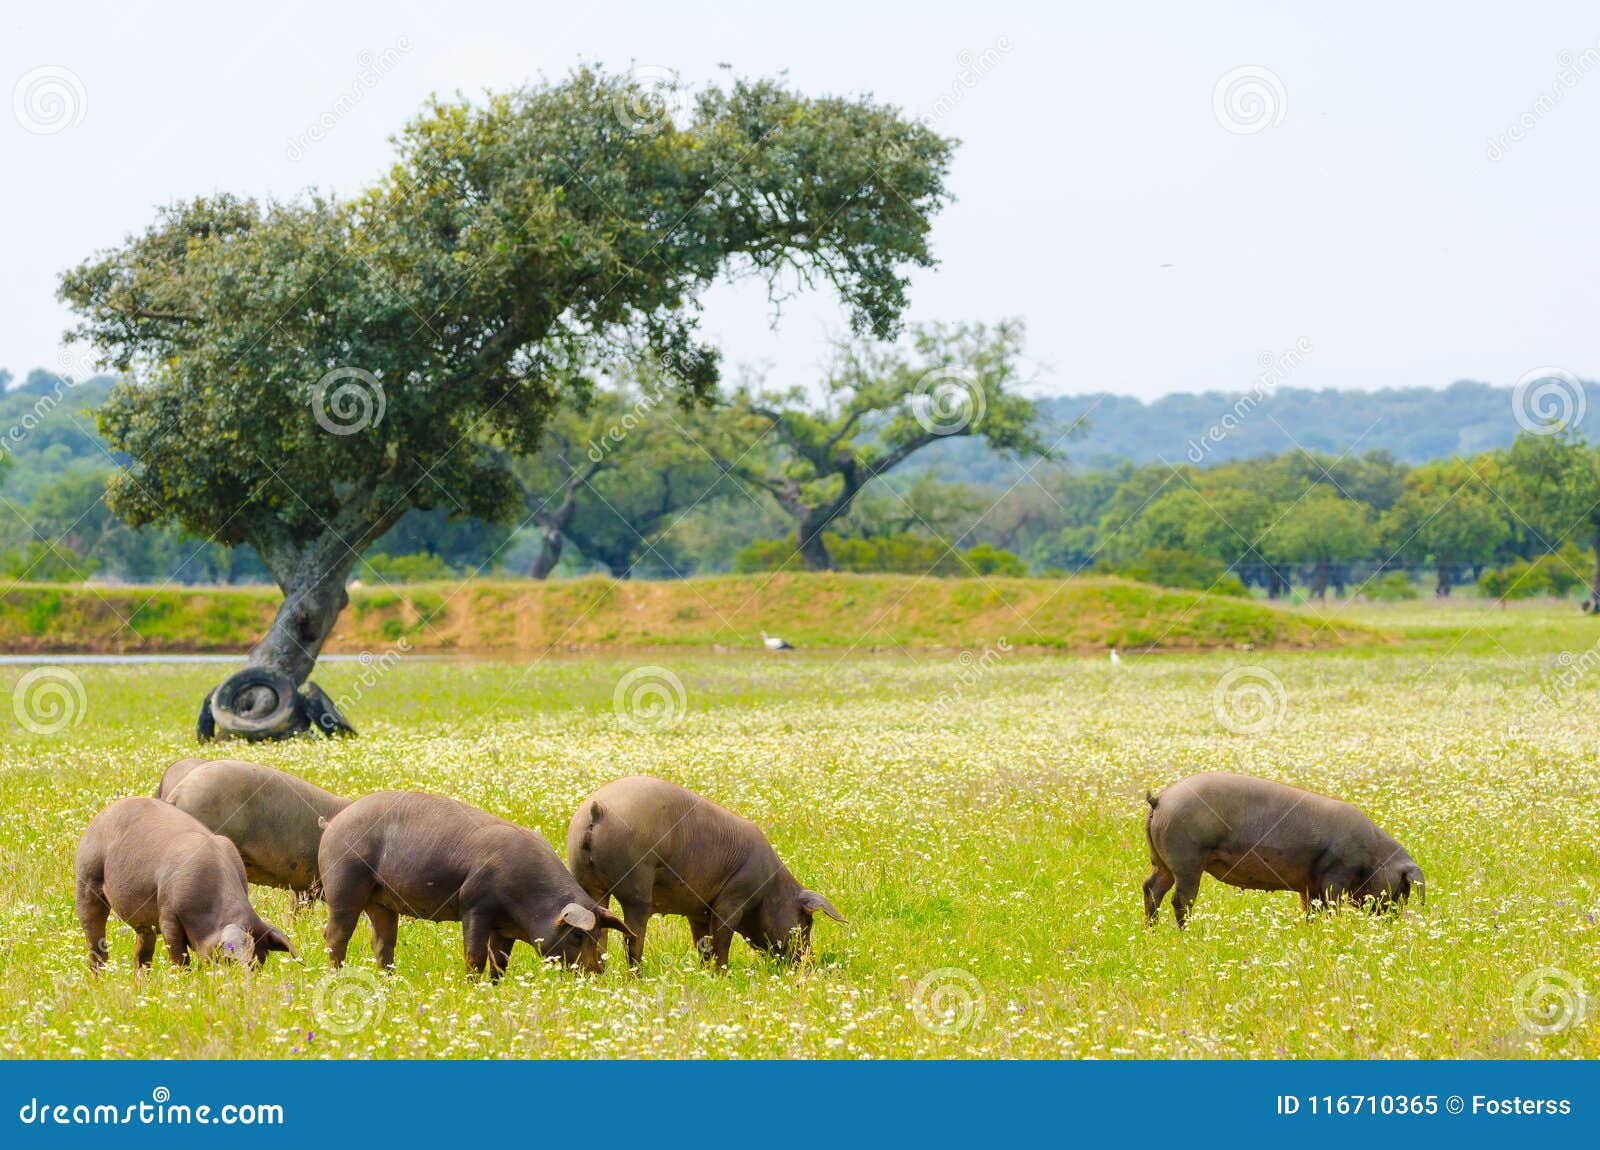 iberian pigs in the meadow of extremadura.